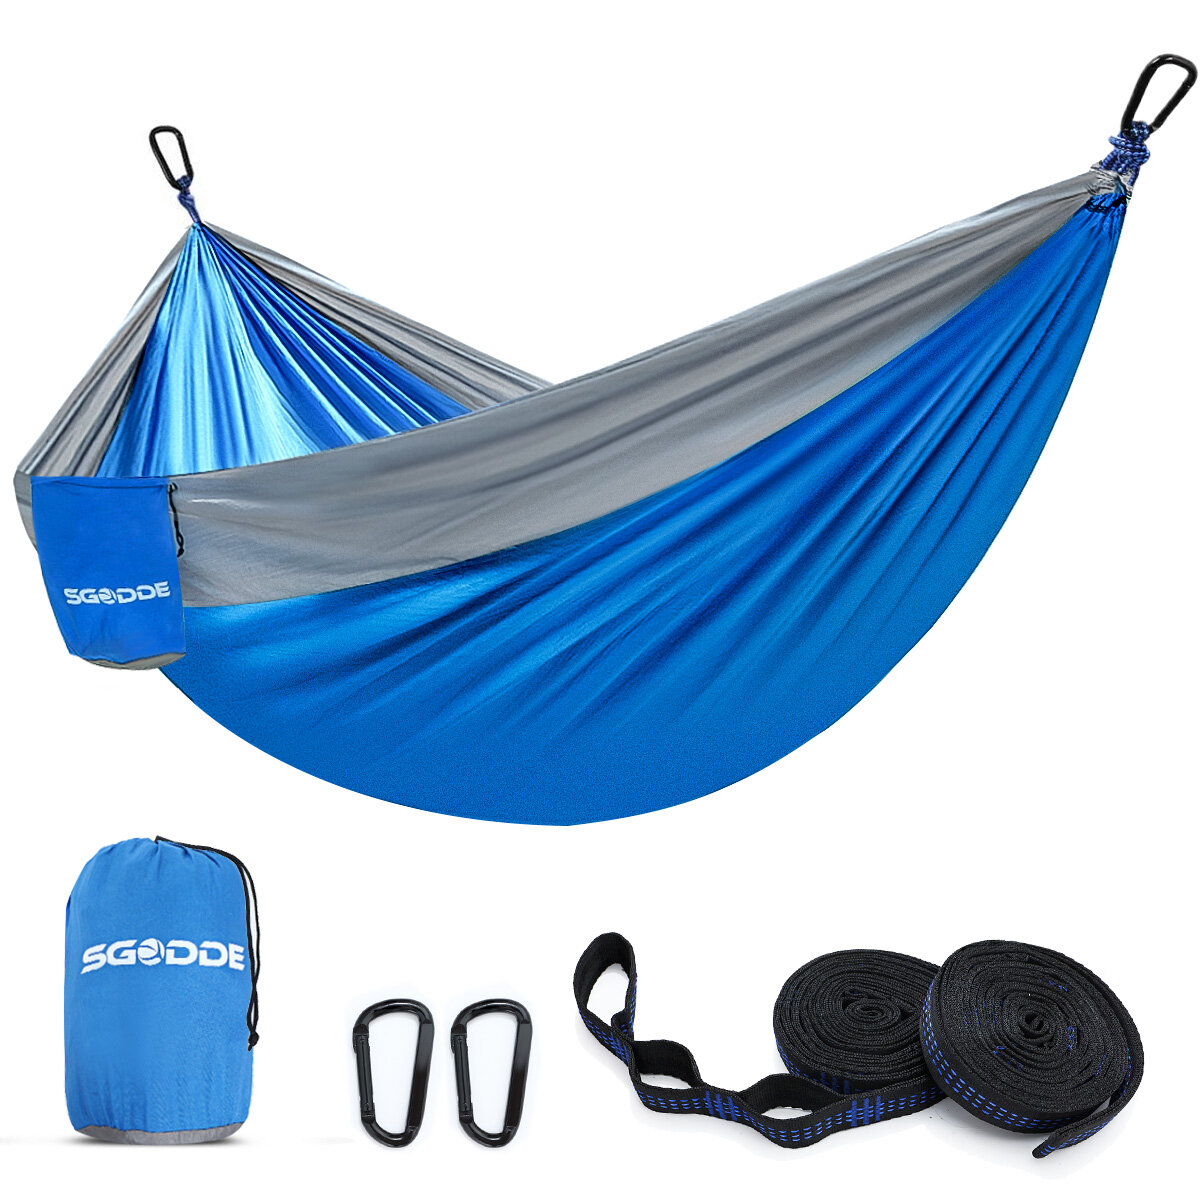 SGODDE Double People Camping Hammock Portable Lightweight Hanging Bed with Tree Straps Travel Beach Backyard Patio